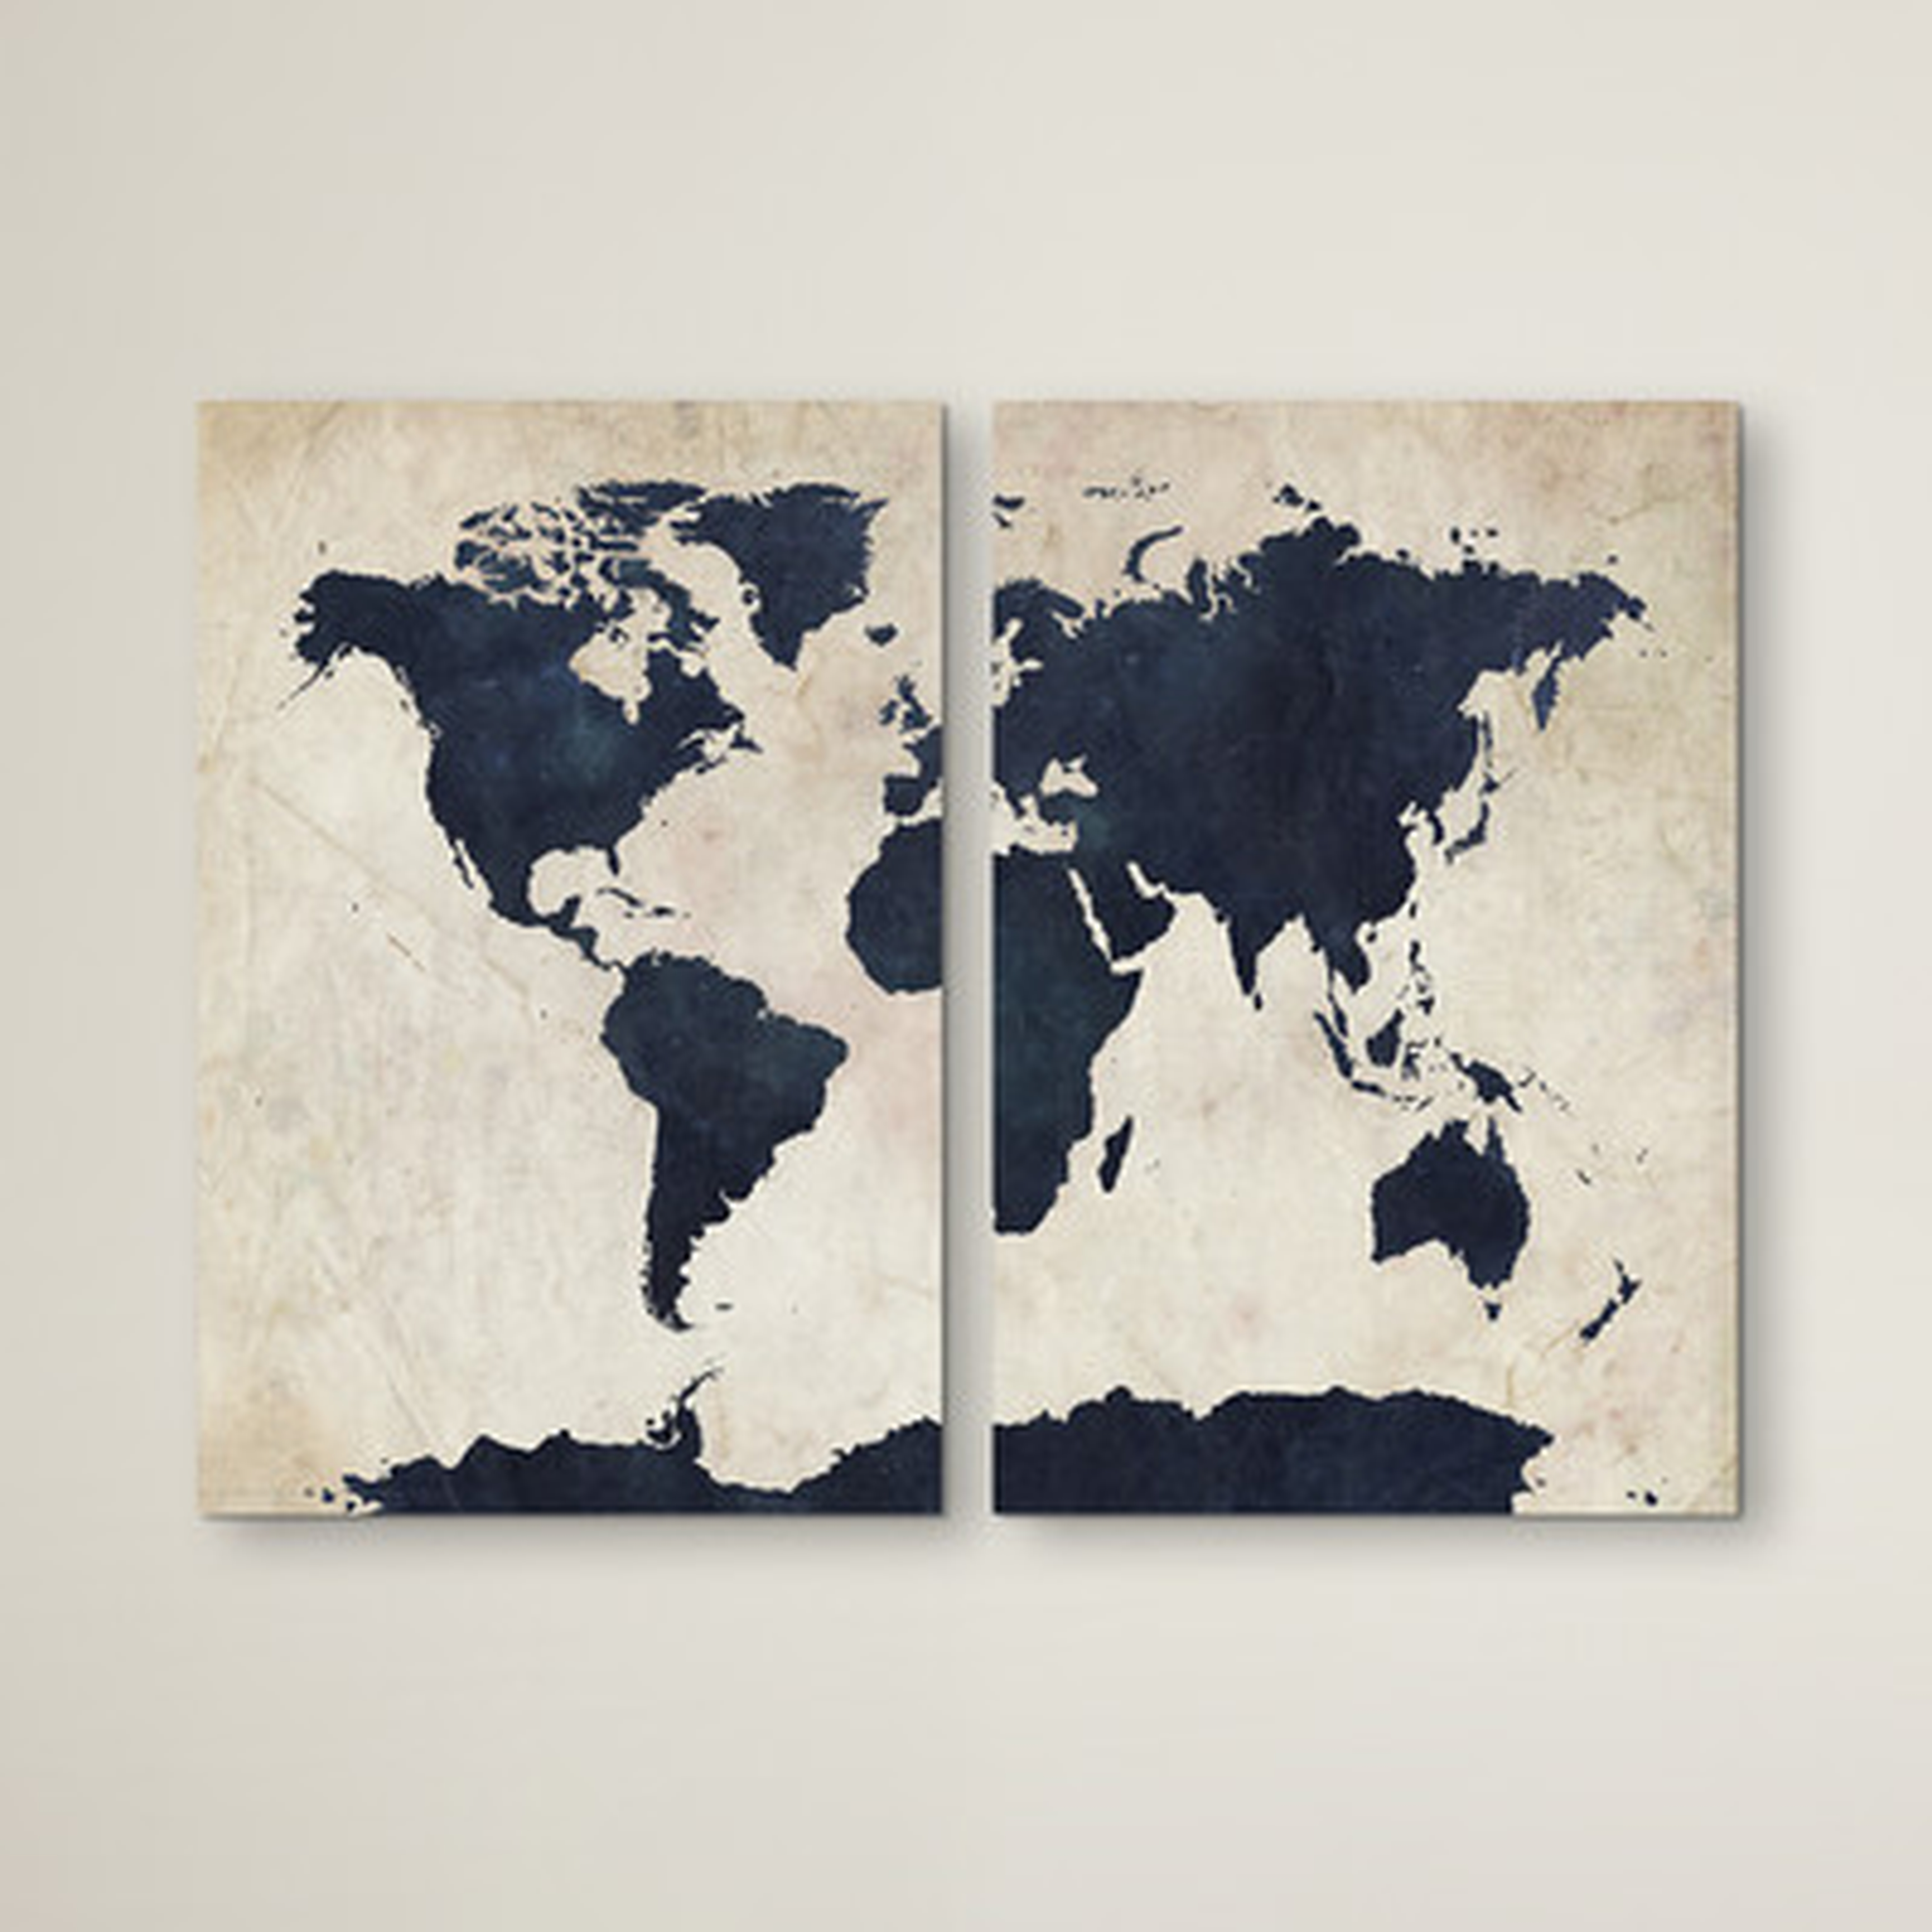 'Globetrotter' 2 Piece Painting Print Set on Wrapped Canvas - AllModern